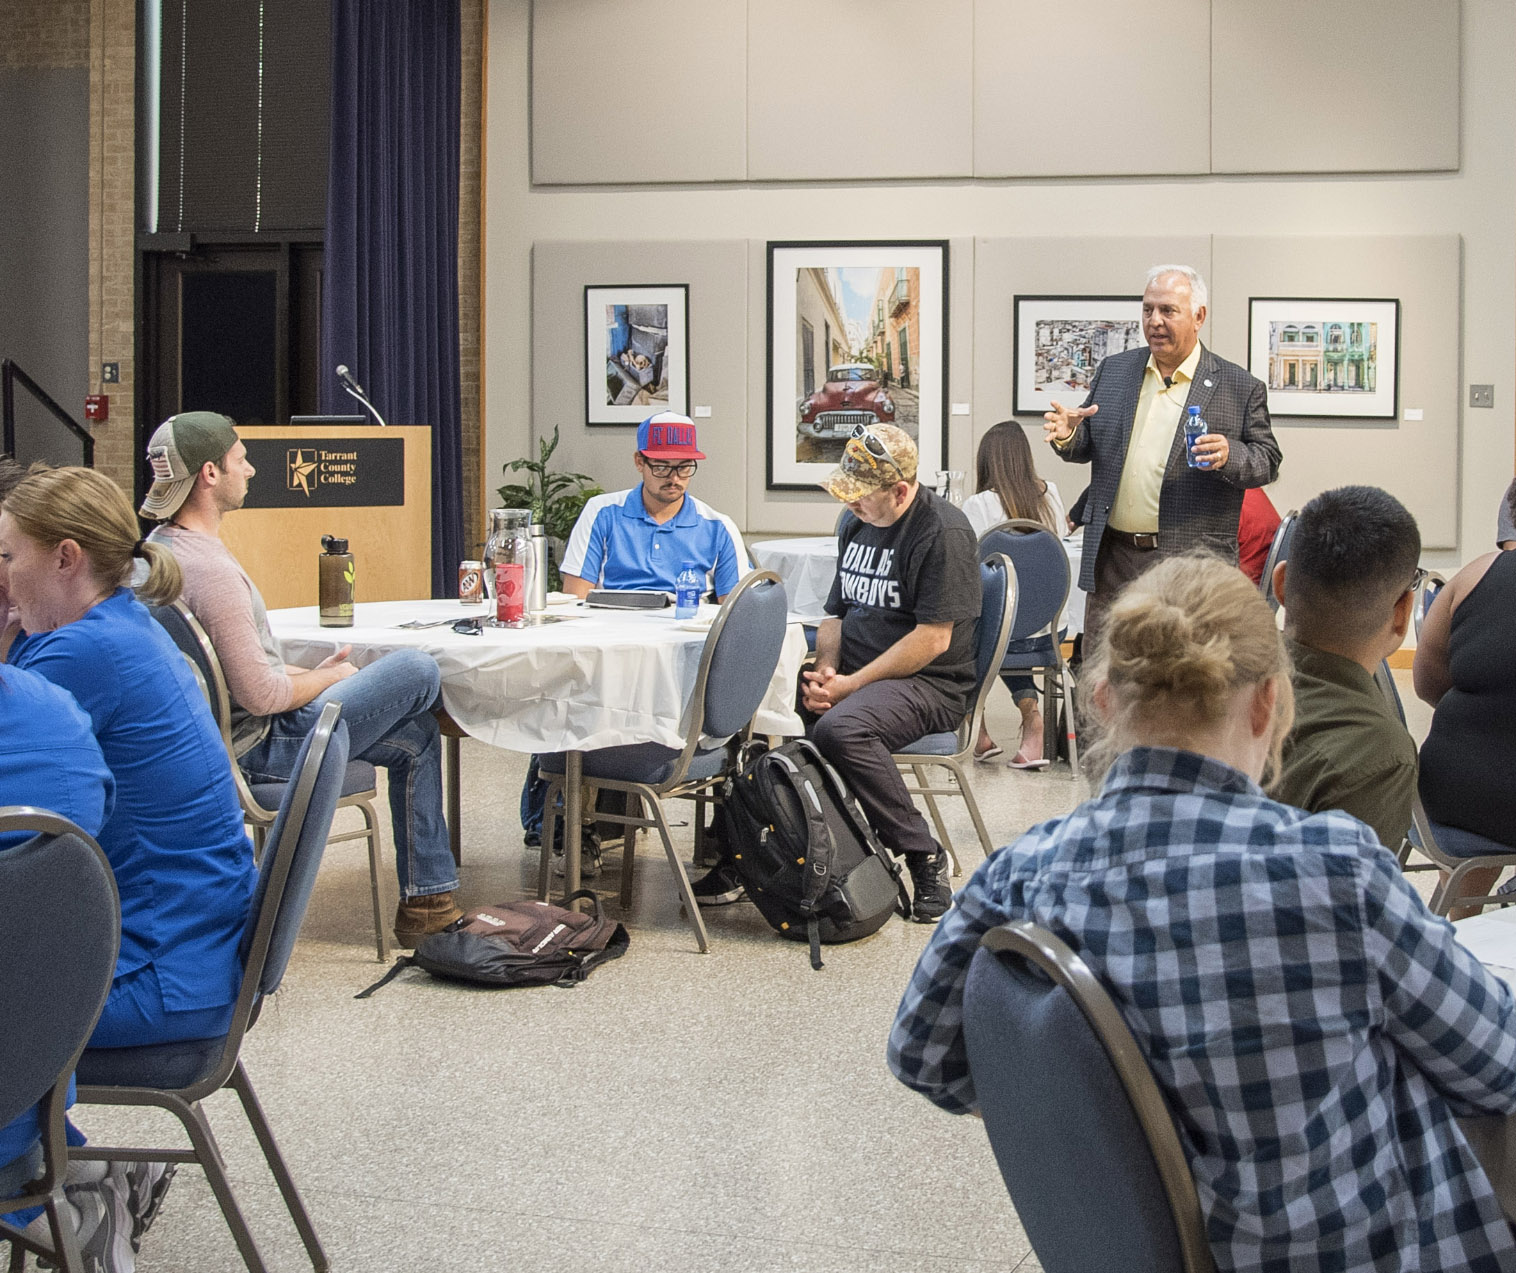 North Richland Hills’ mayor Oscar Trevino talks to students about the importance of getting involved in things that interest them during Pizza with a Purpose Sept. 20 on NE Campus.